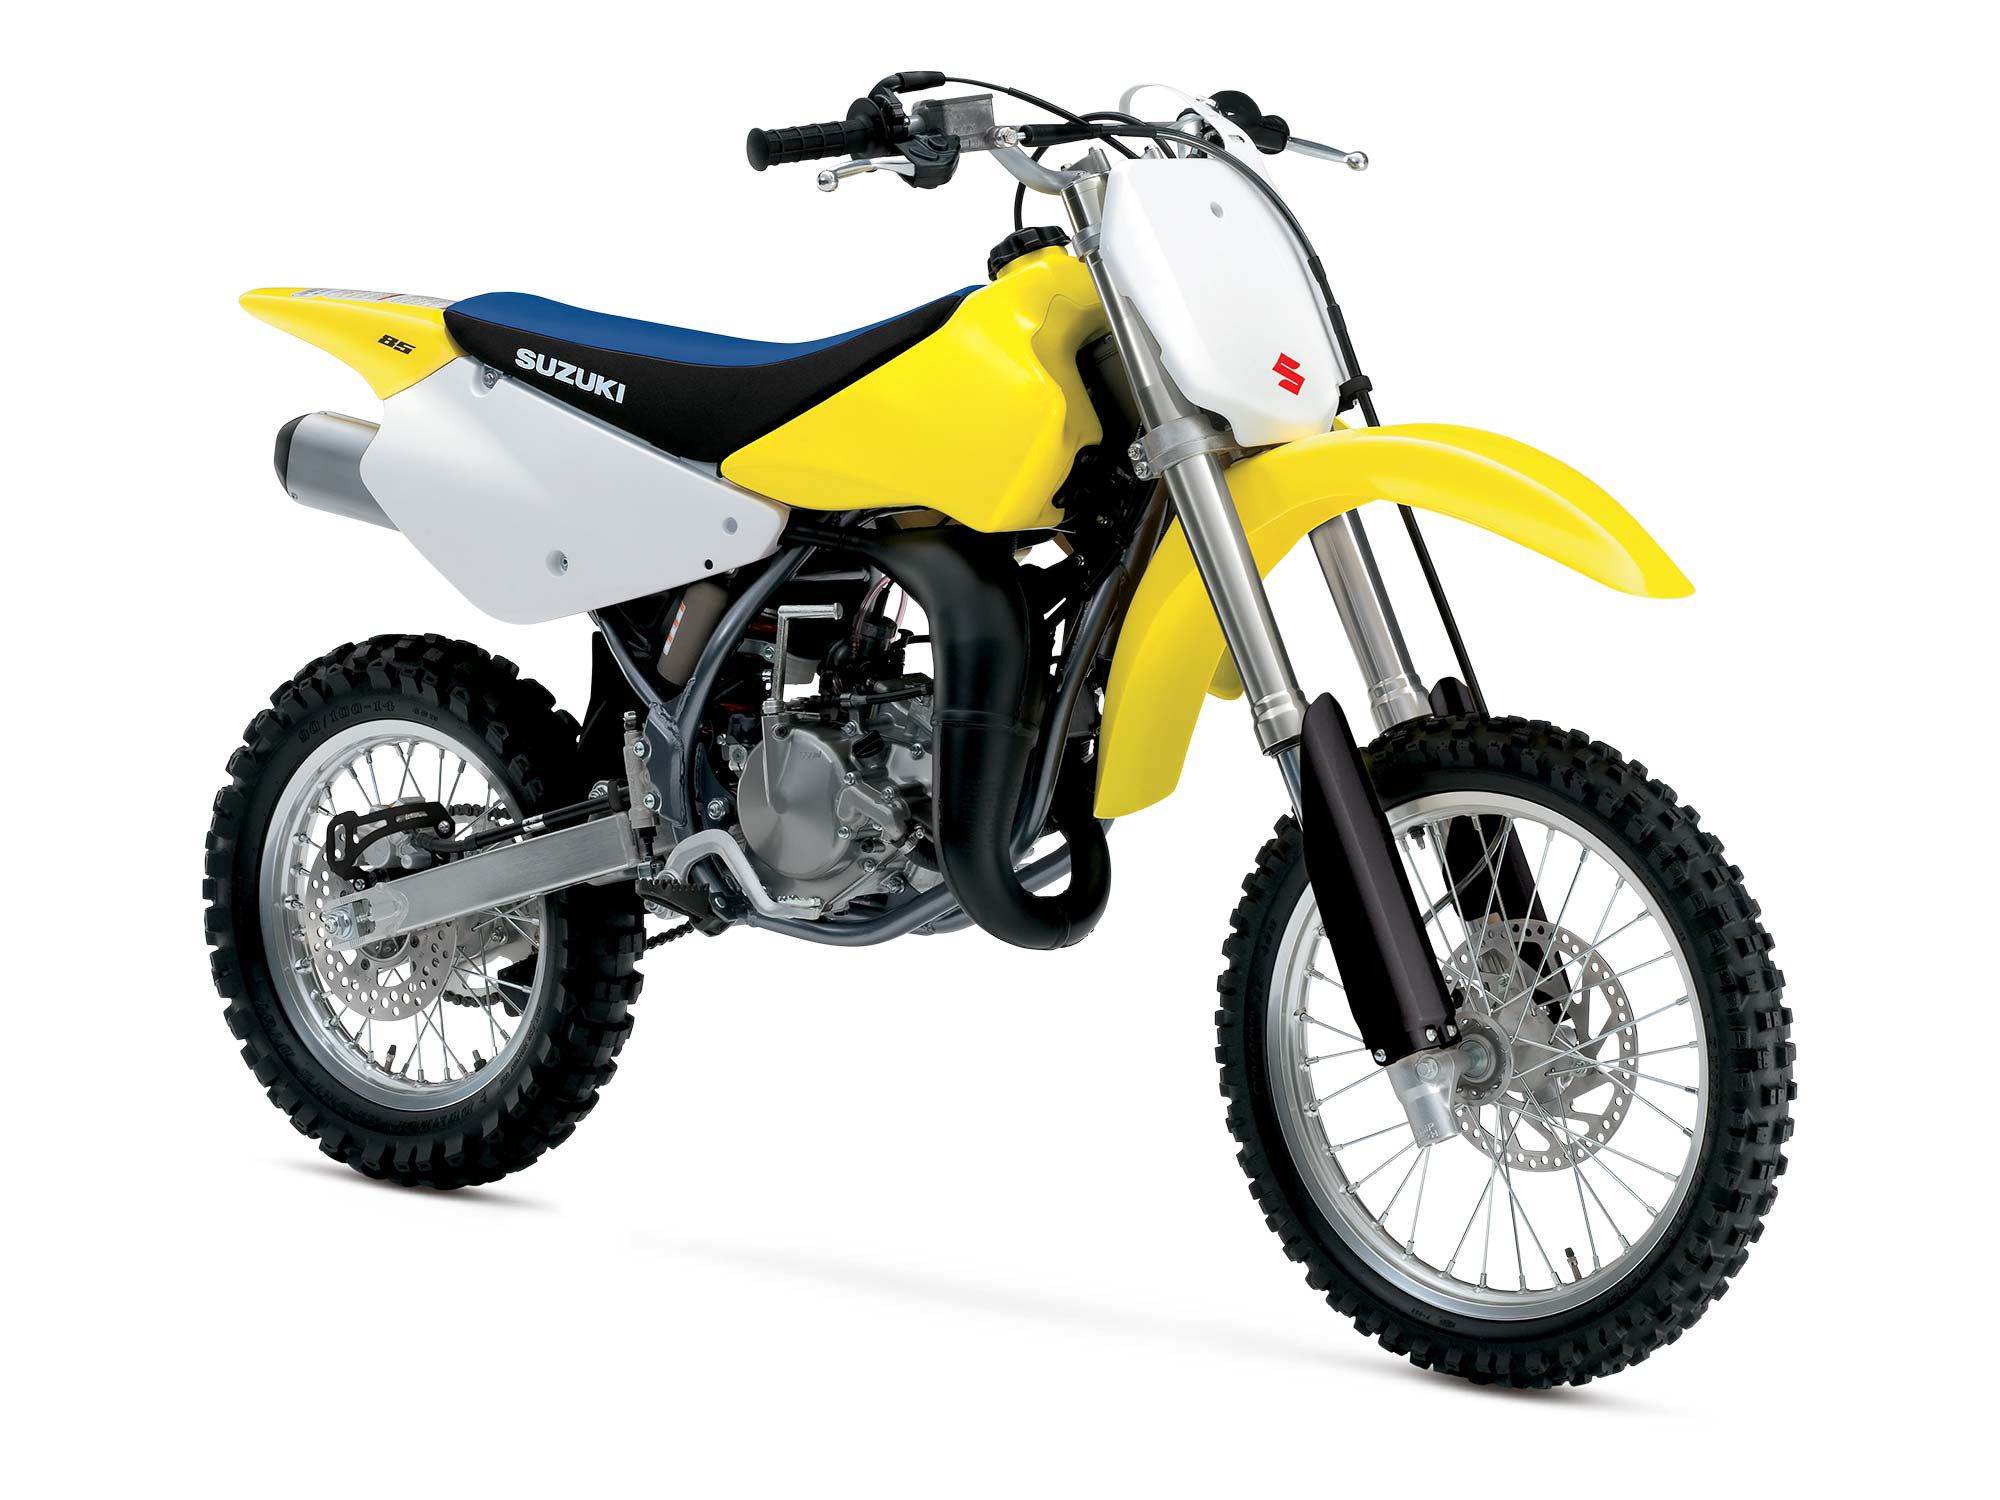 The 85cc motocross bikes are a natural progression up from 65cc.